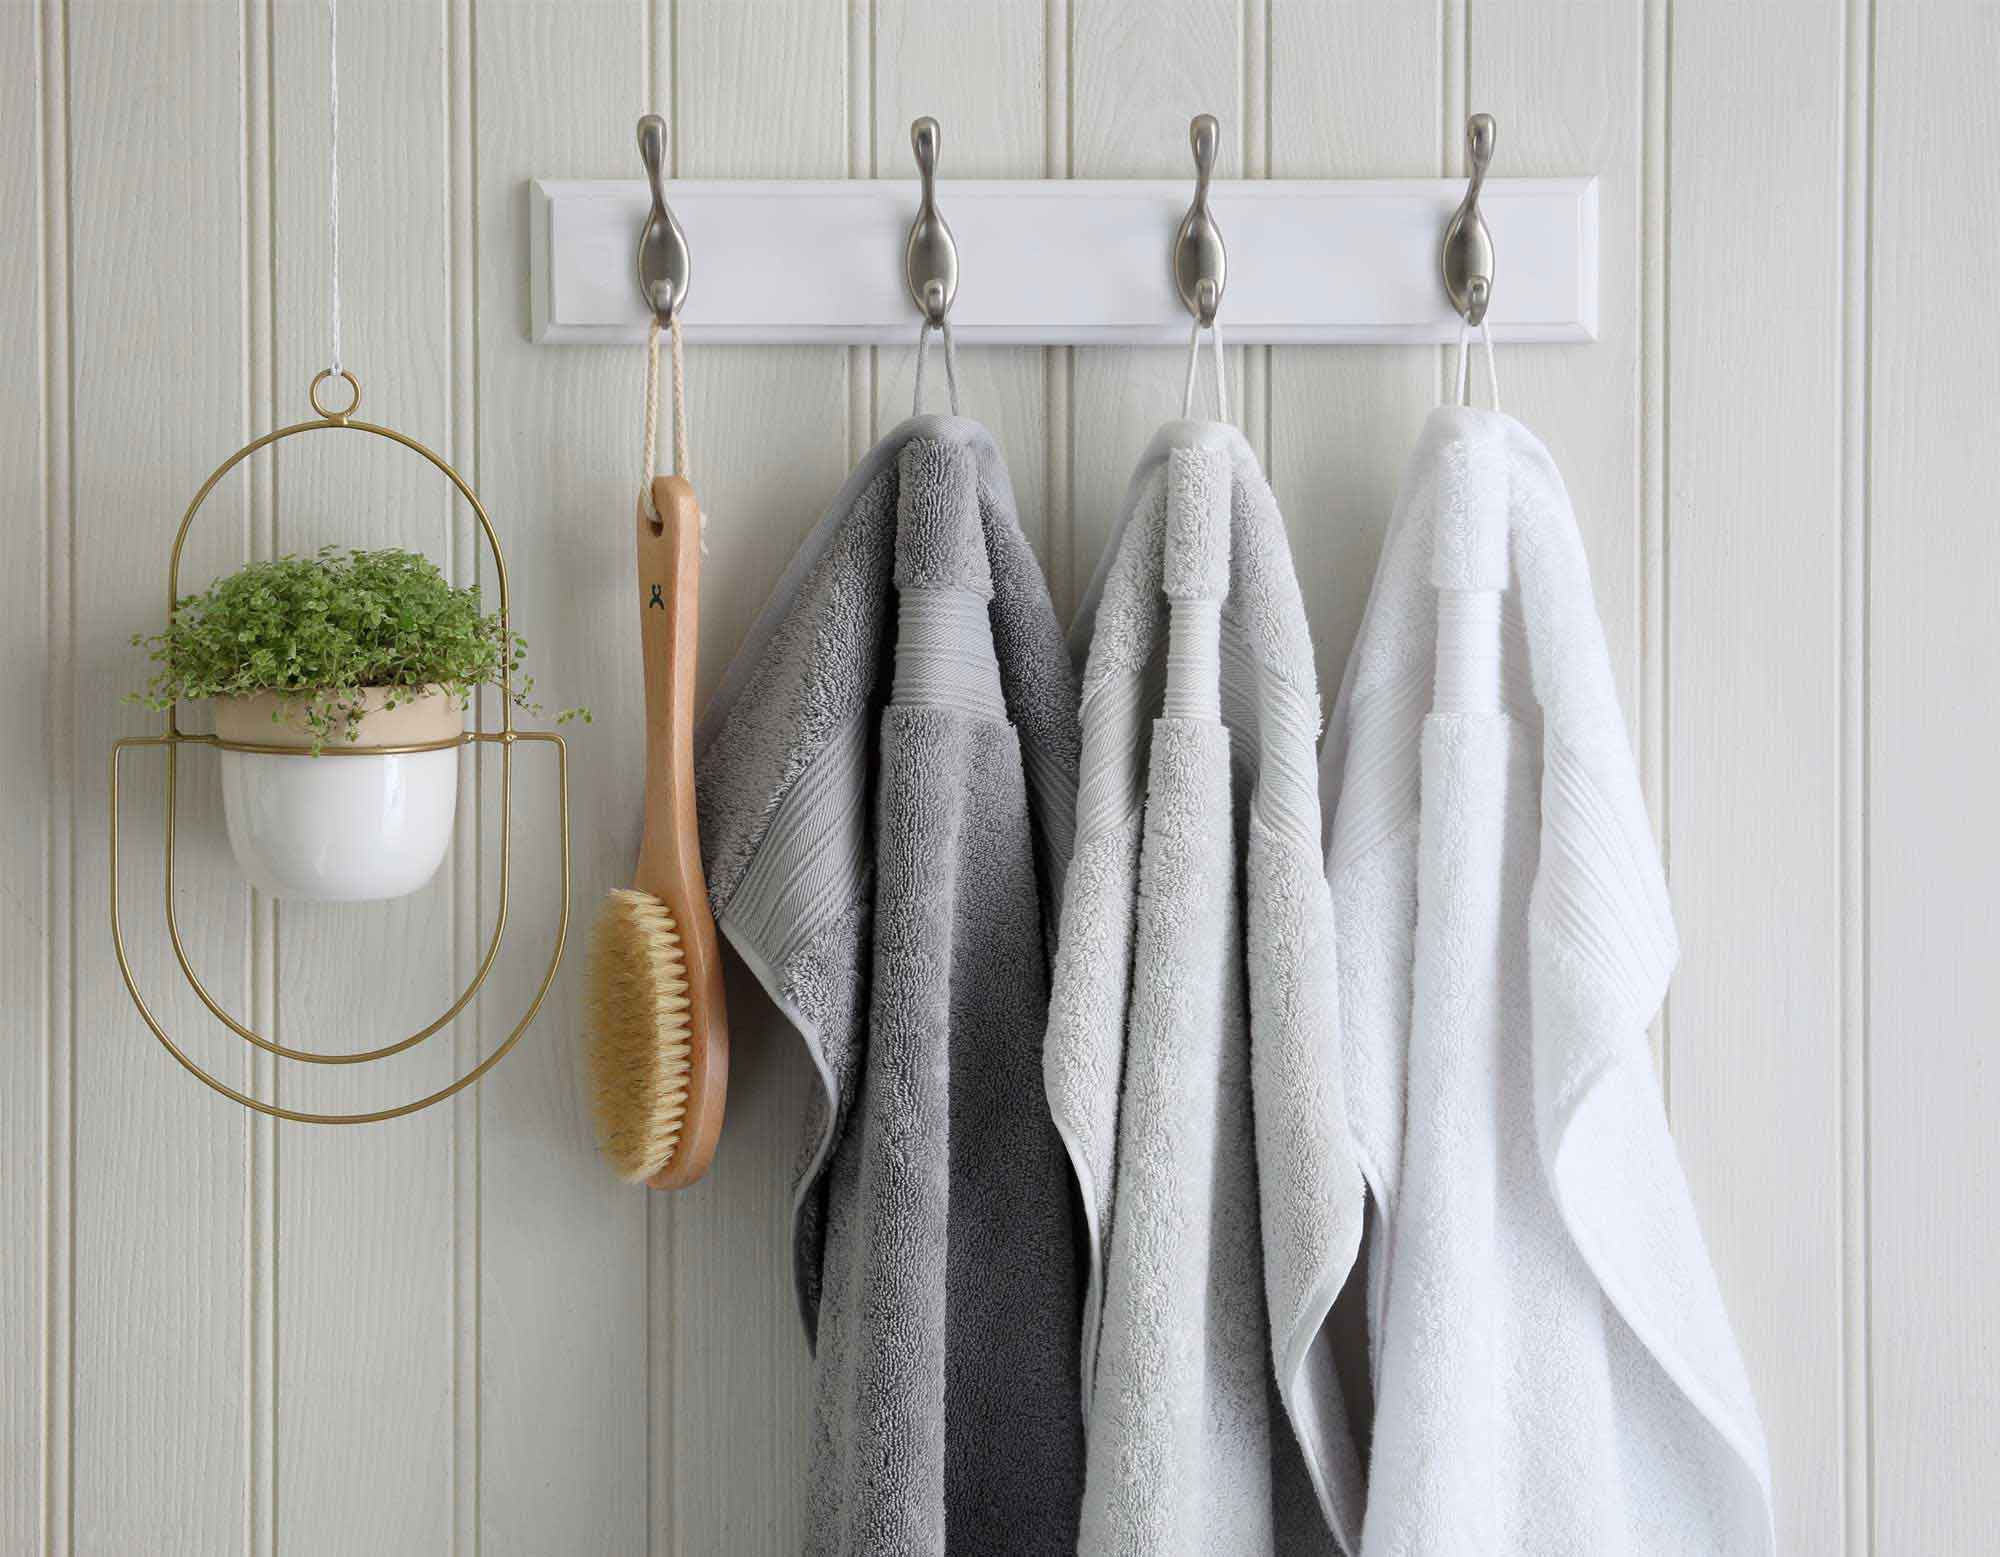 Egyptian cotton bath towels with scrubbing brush hanging from wall hooks